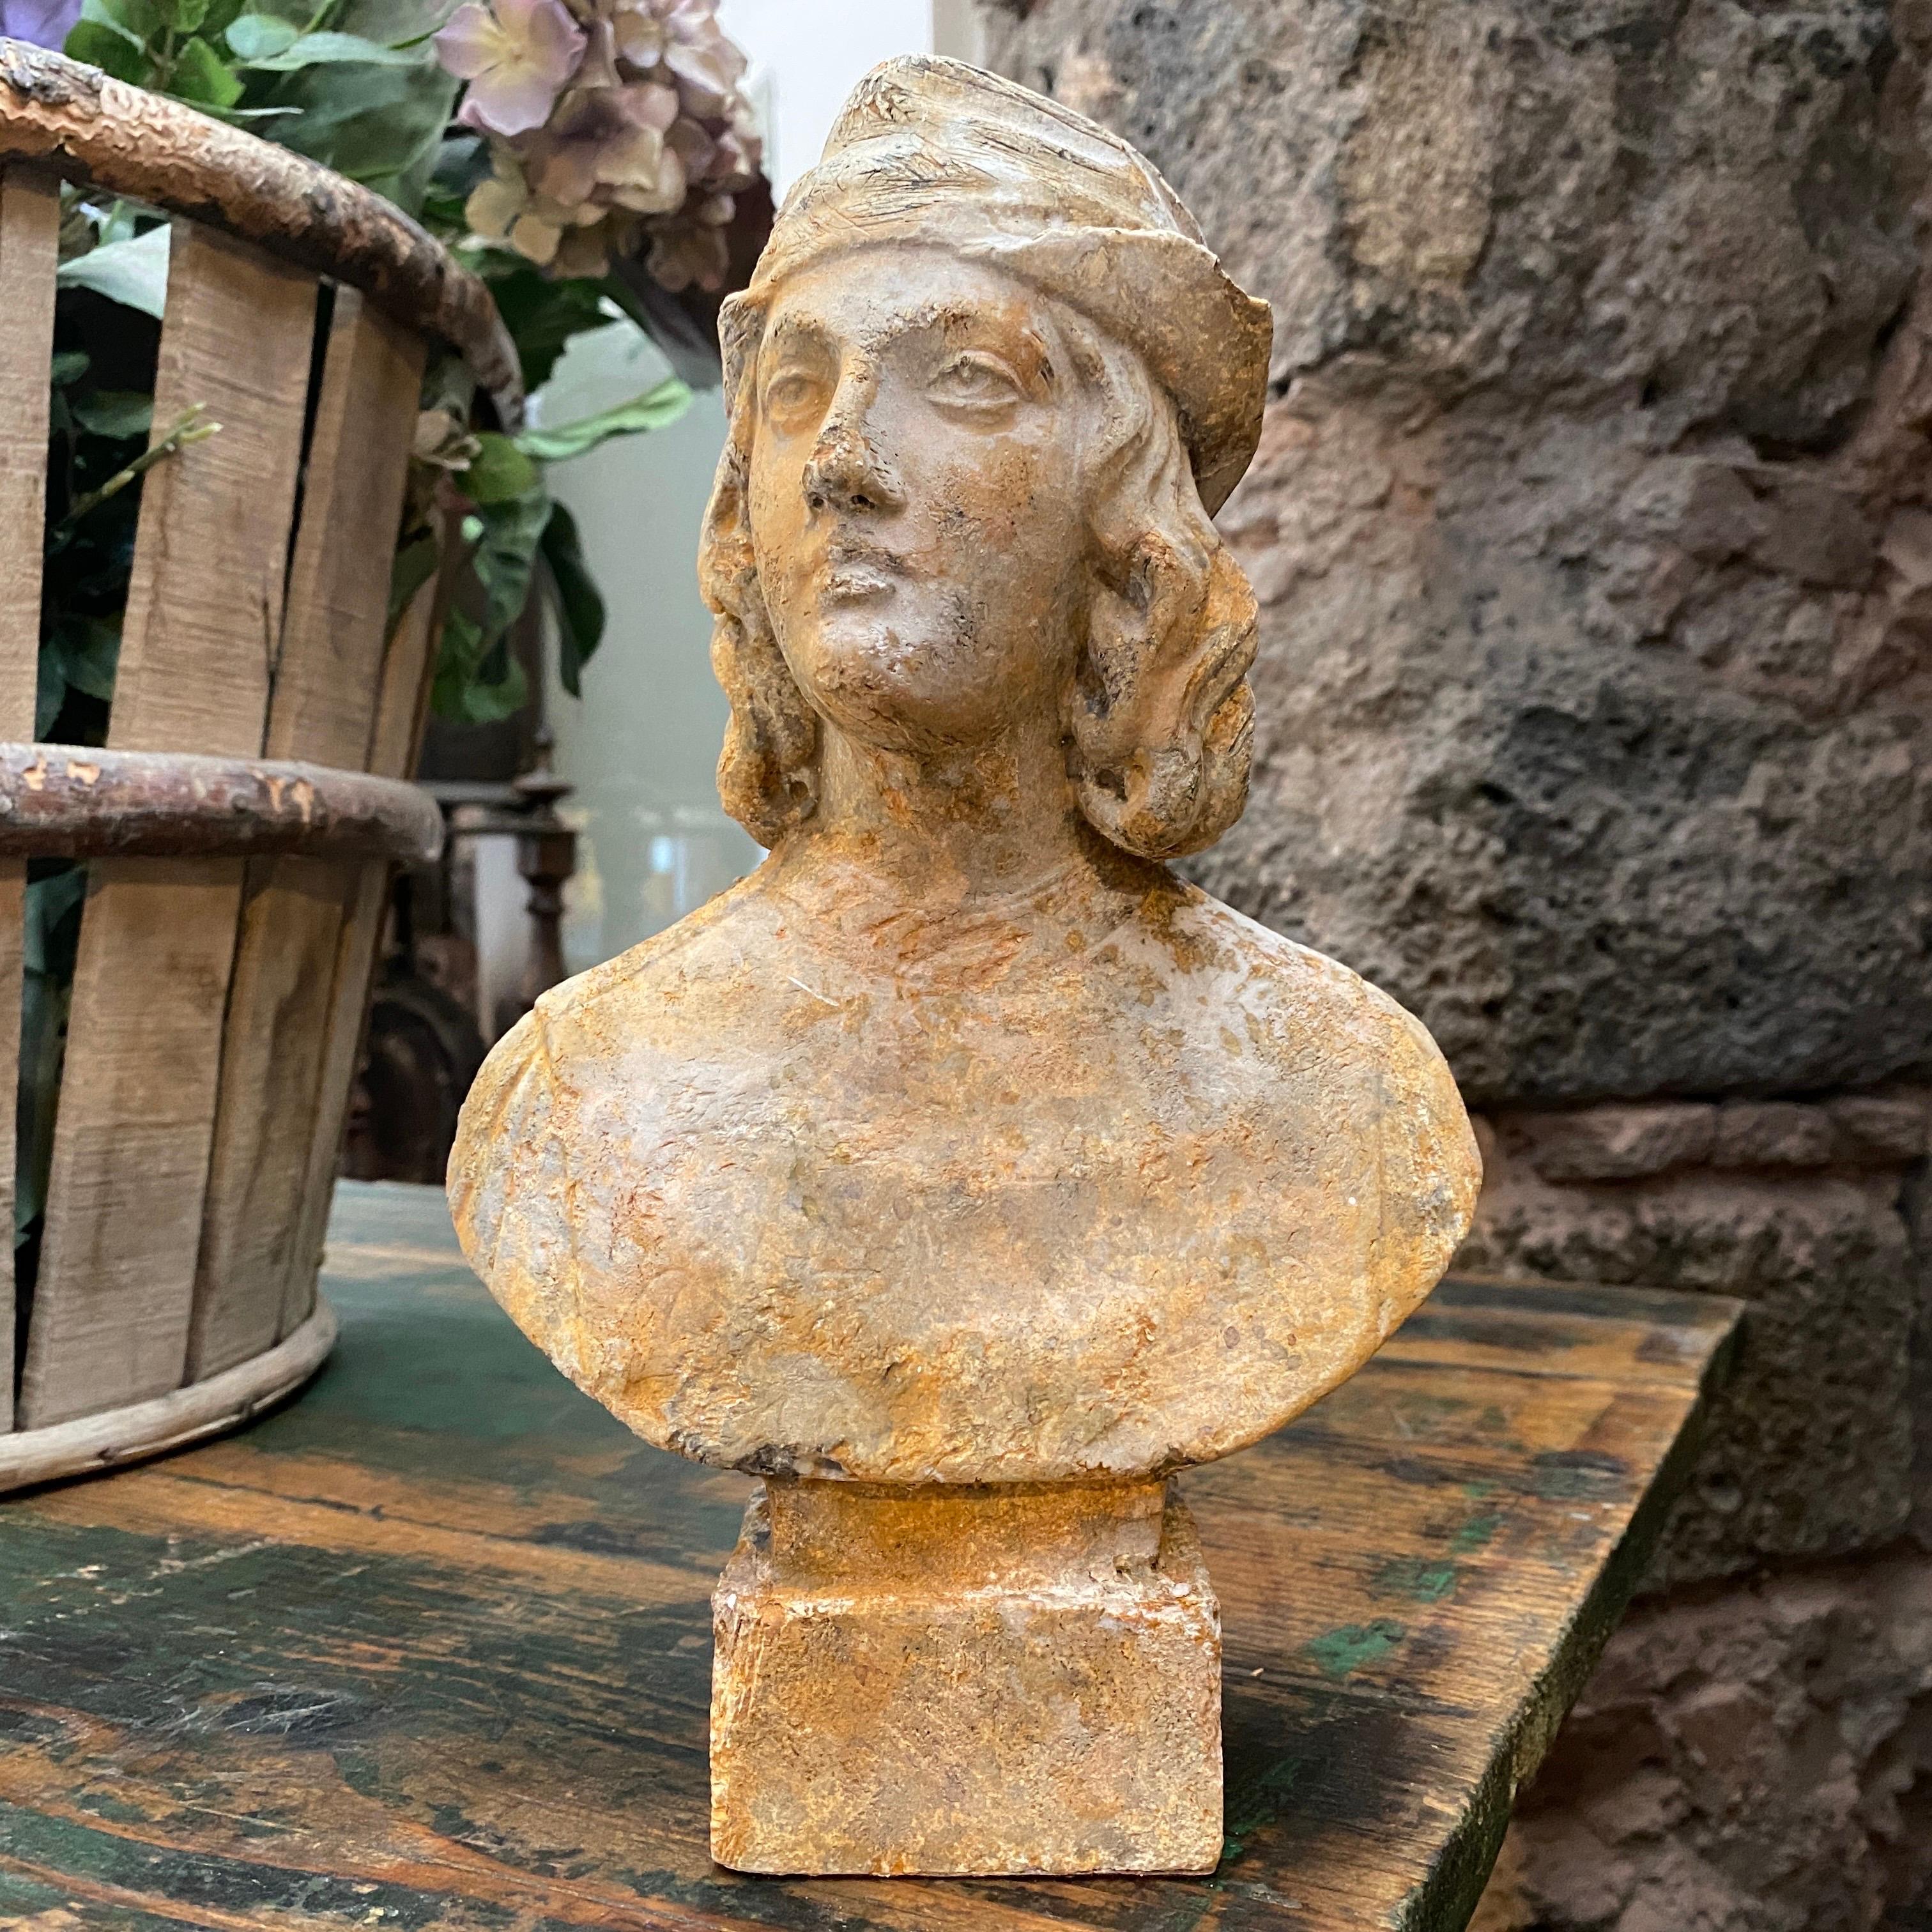 Louis Philippe 1930s Original Patina Sicilian Plaster Sculpture depicting a Bust of Young Man